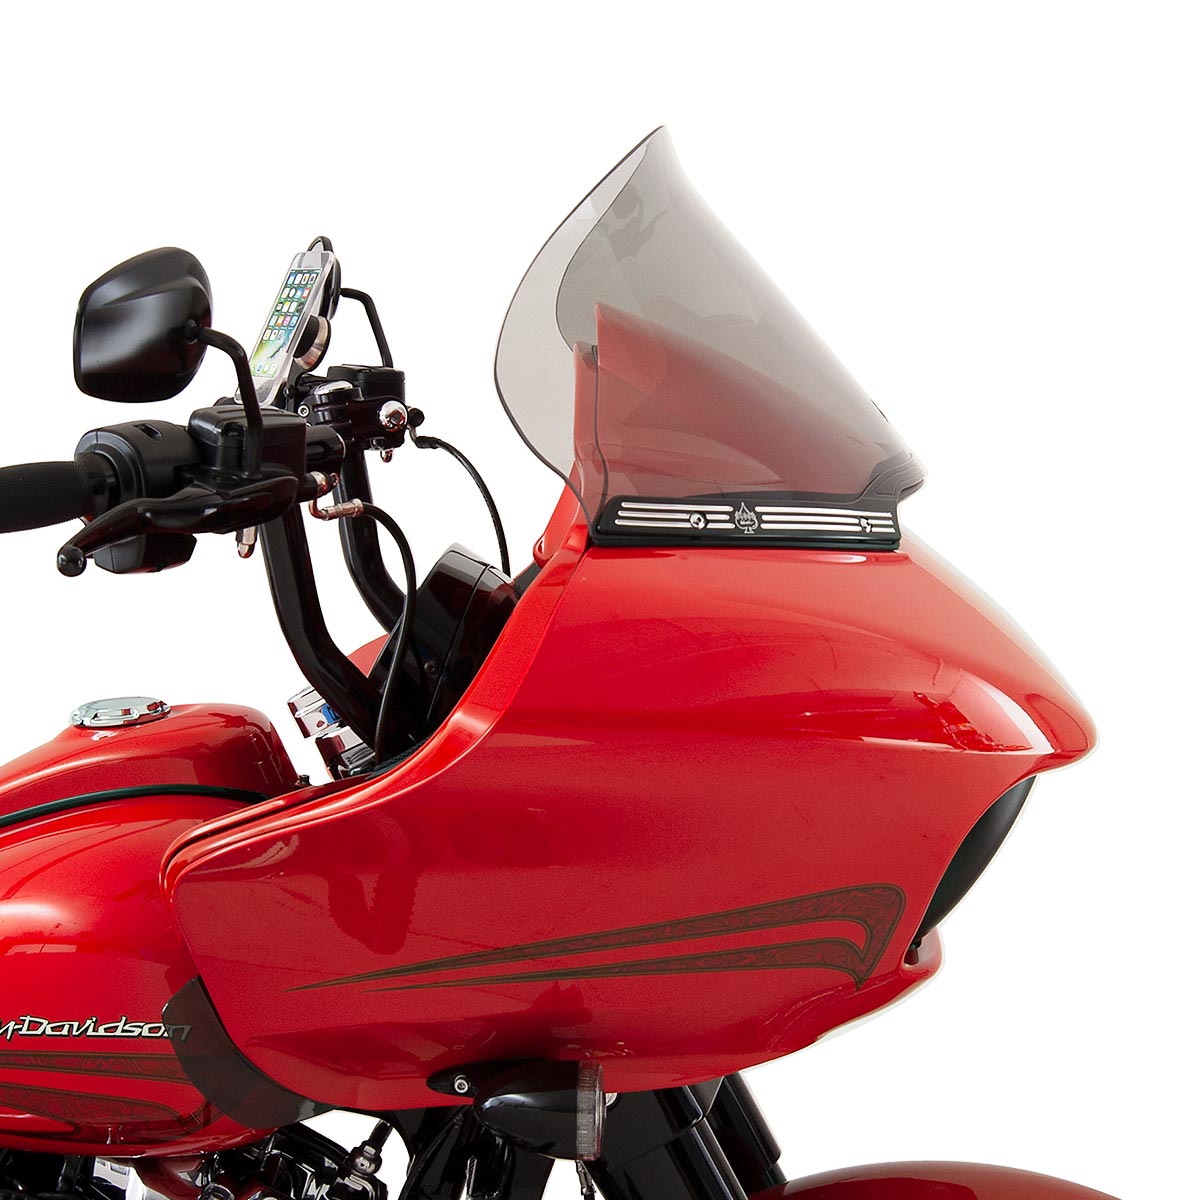 12" Pro-Touring Tint Flare™ Windshields for Harley-Davidson 2015-2023 Road Glide motorcycle models(12" Pro-Touring - Tint)